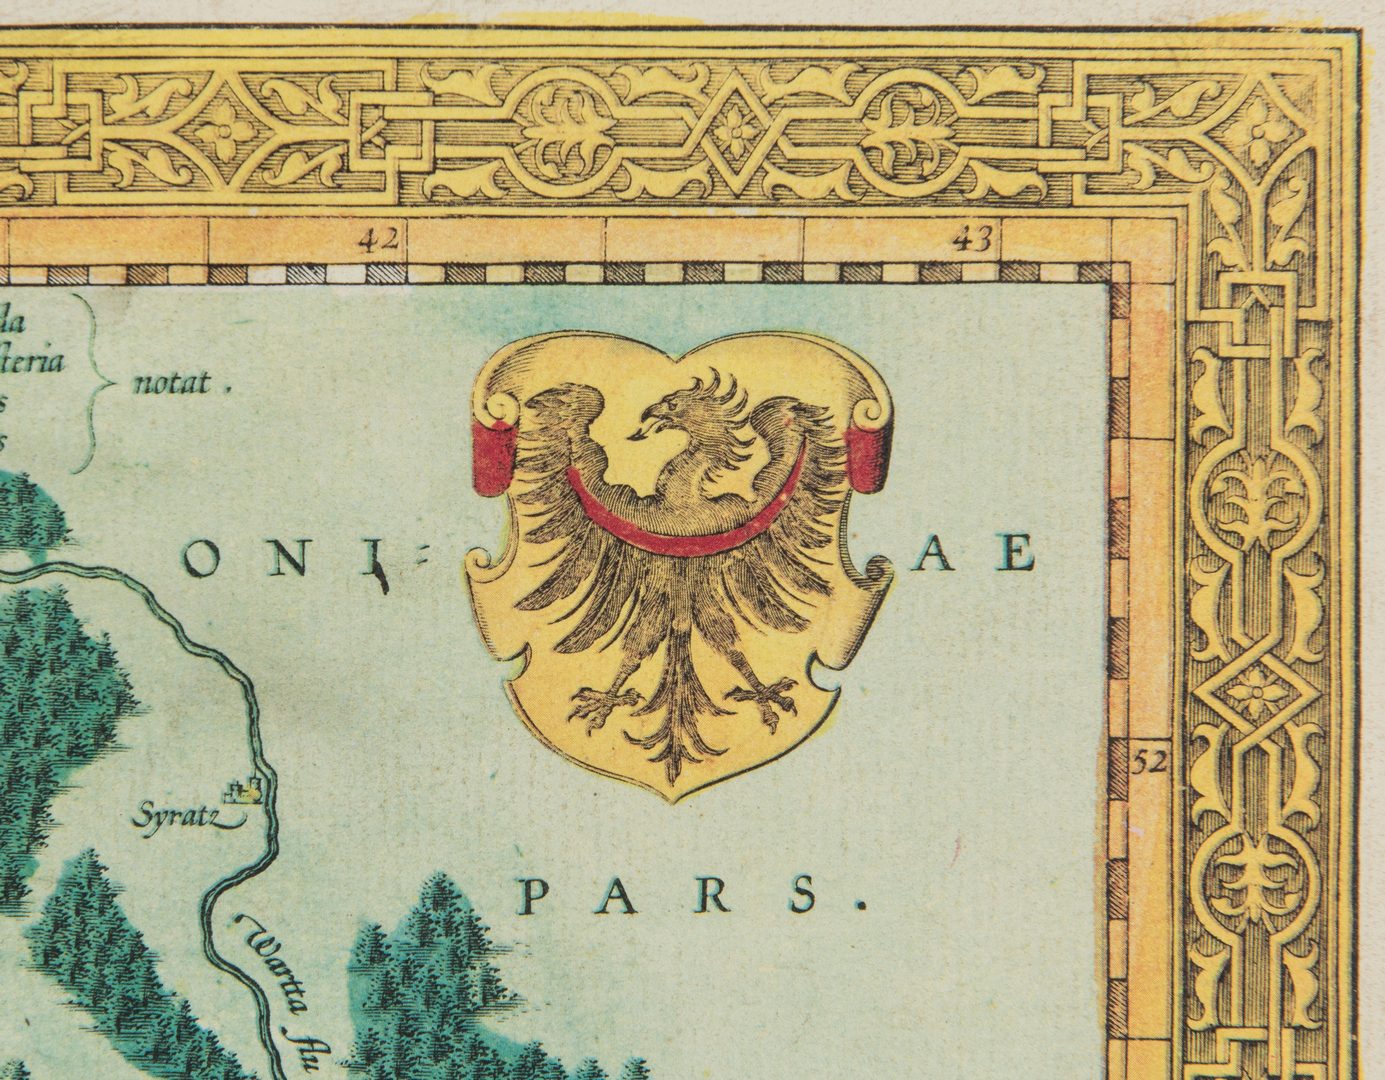 Lot 170: 3 Maps, incl. Helwig, Ortelius, Munster, and Vaugondy